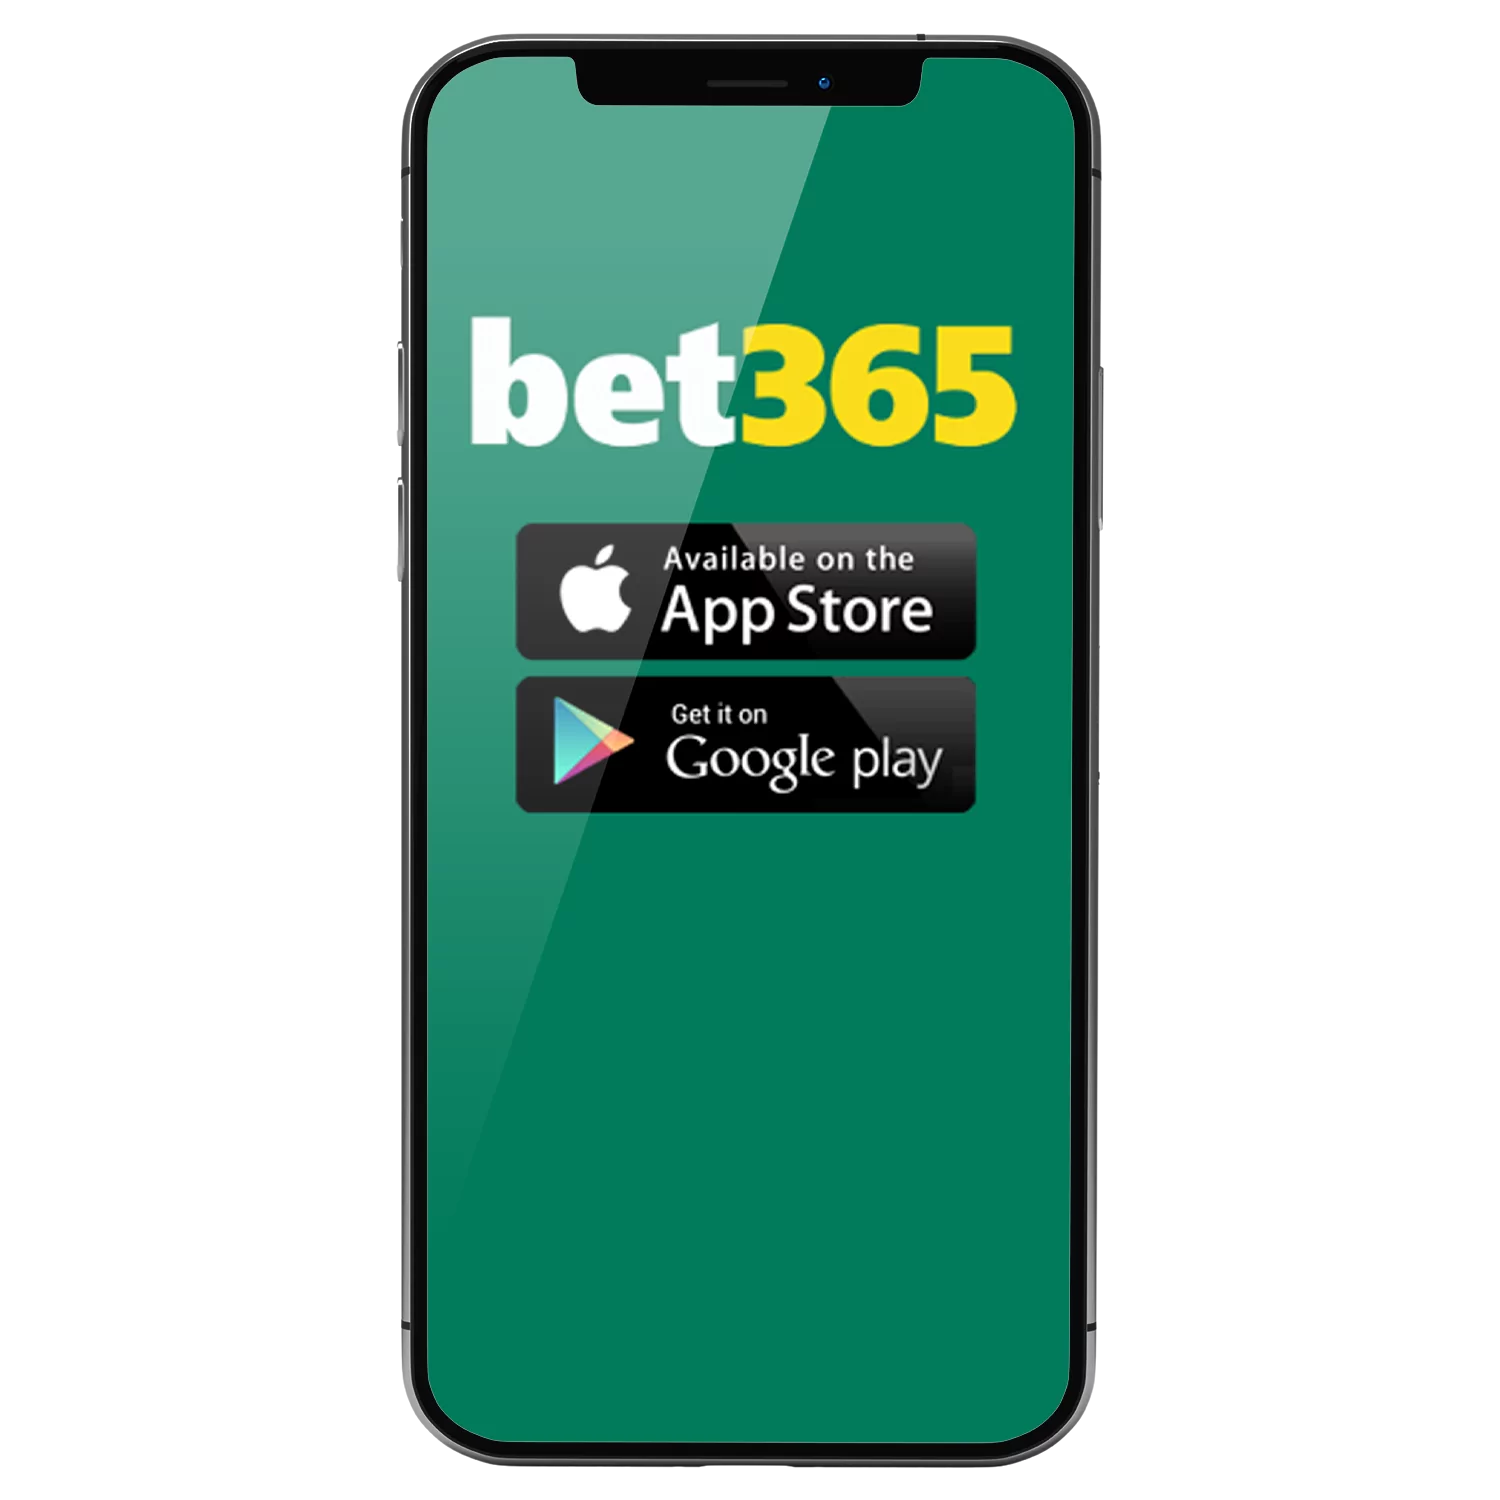 Read our review about sports betting in the Bet365 app.